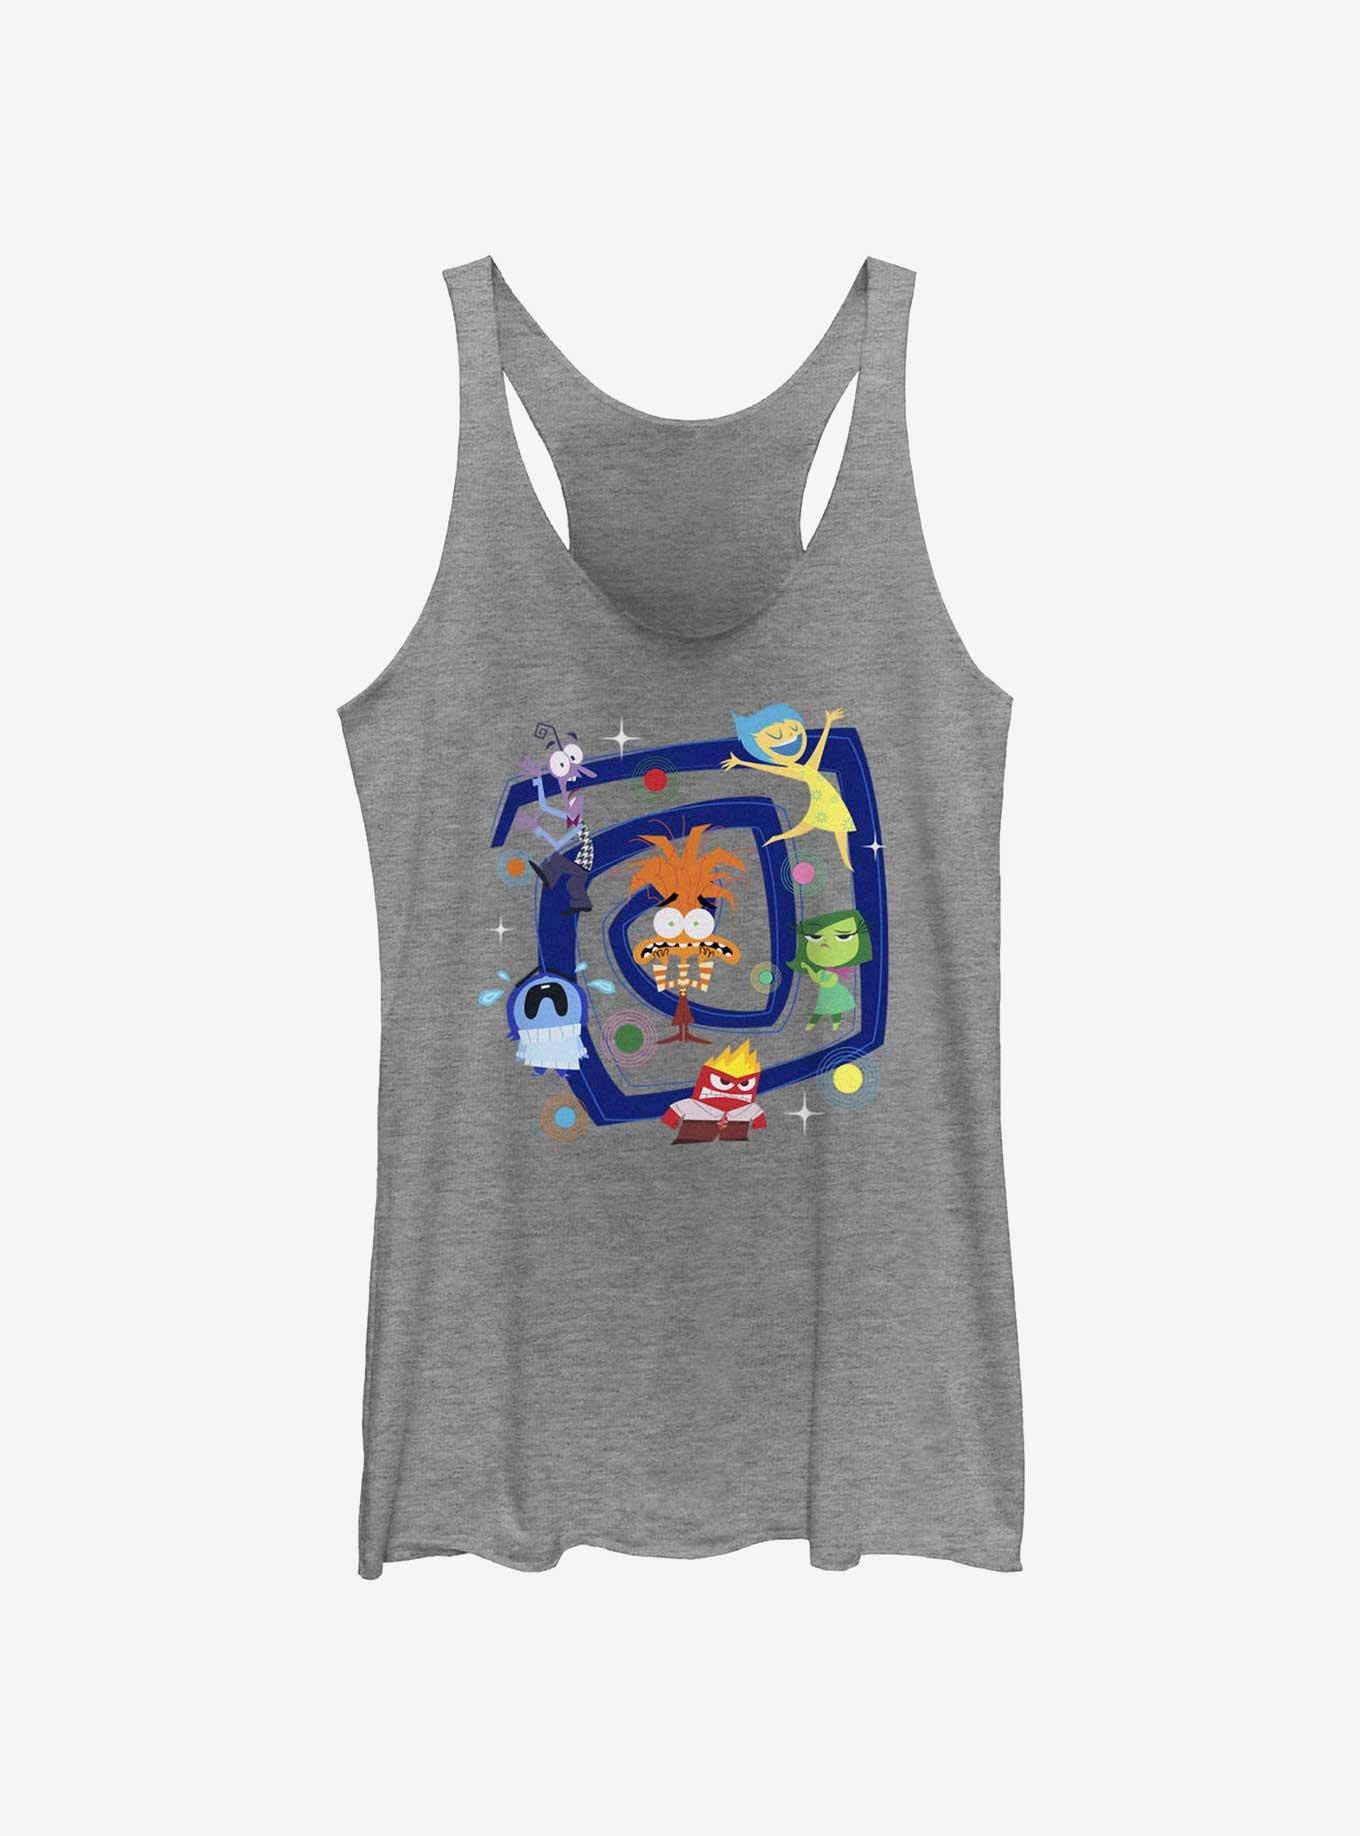 Disney Pixar Inside Out 2 All Emotions Swirling Womens Tank Top, GRAY HTR, hi-res